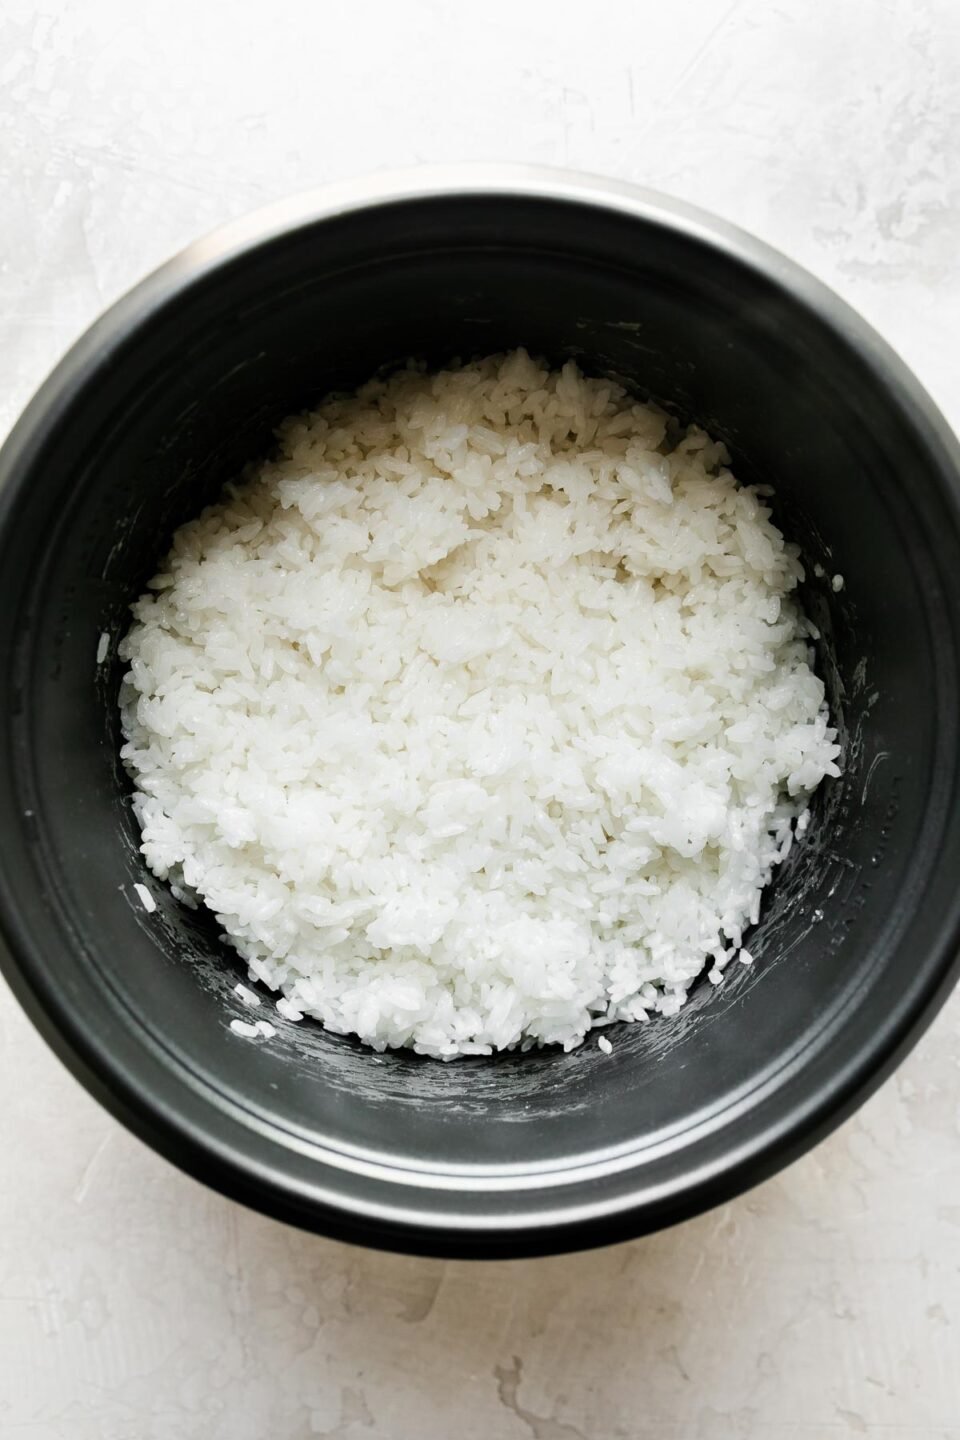 Cooked rice rests in the bottom of a pot-style rice cooker. The rice cooker rests atop a creamy white textured surface.